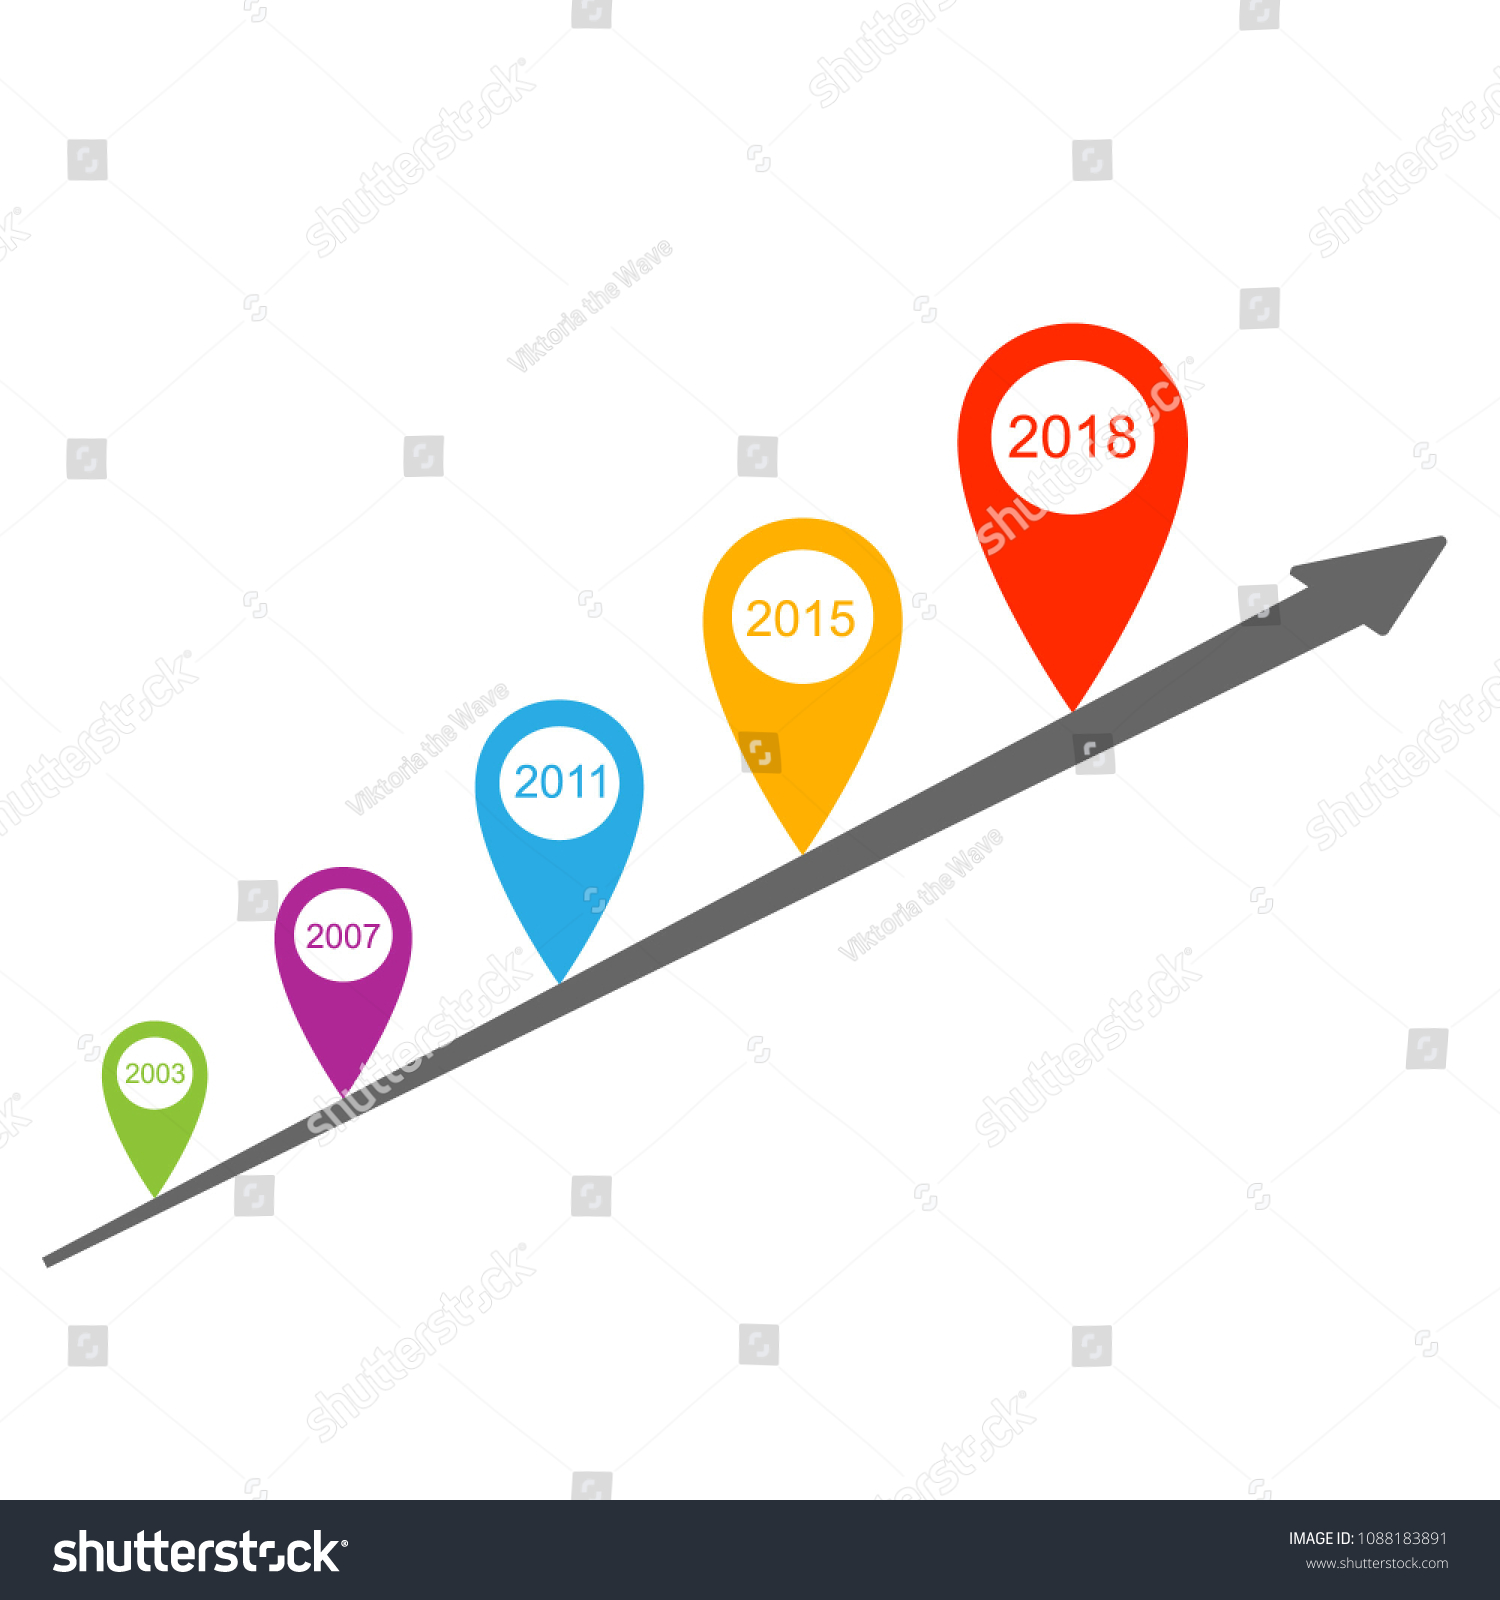 Vector infographic milestones timeline solid arrow template in minimalistic style with pointers. #1088183891